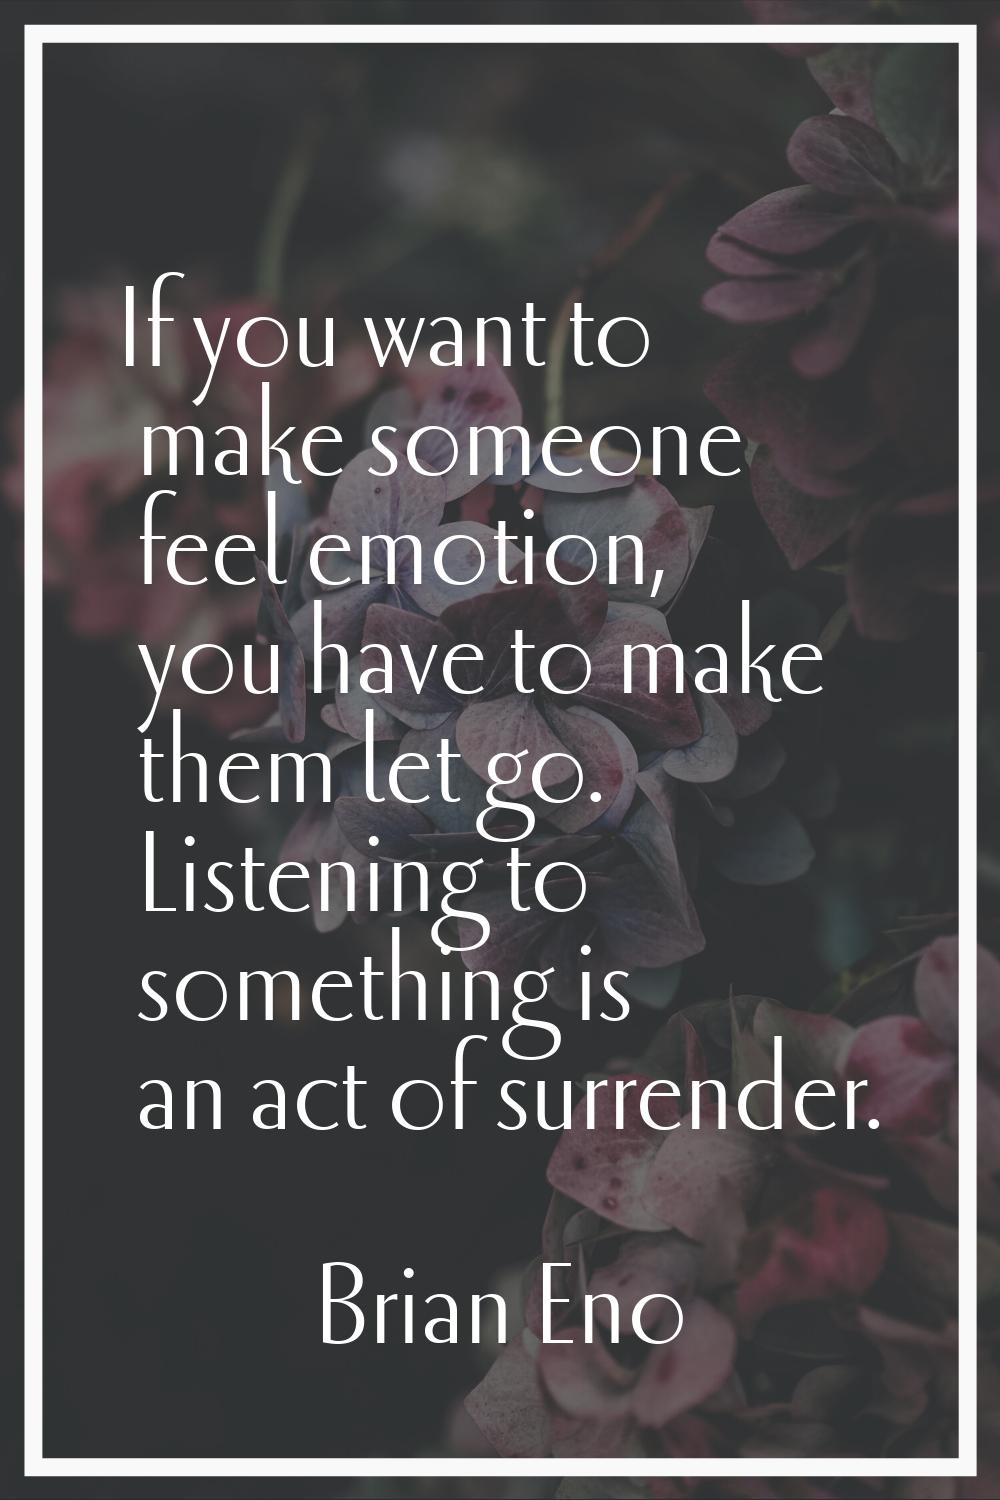 If you want to make someone feel emotion, you have to make them let go. Listening to something is a